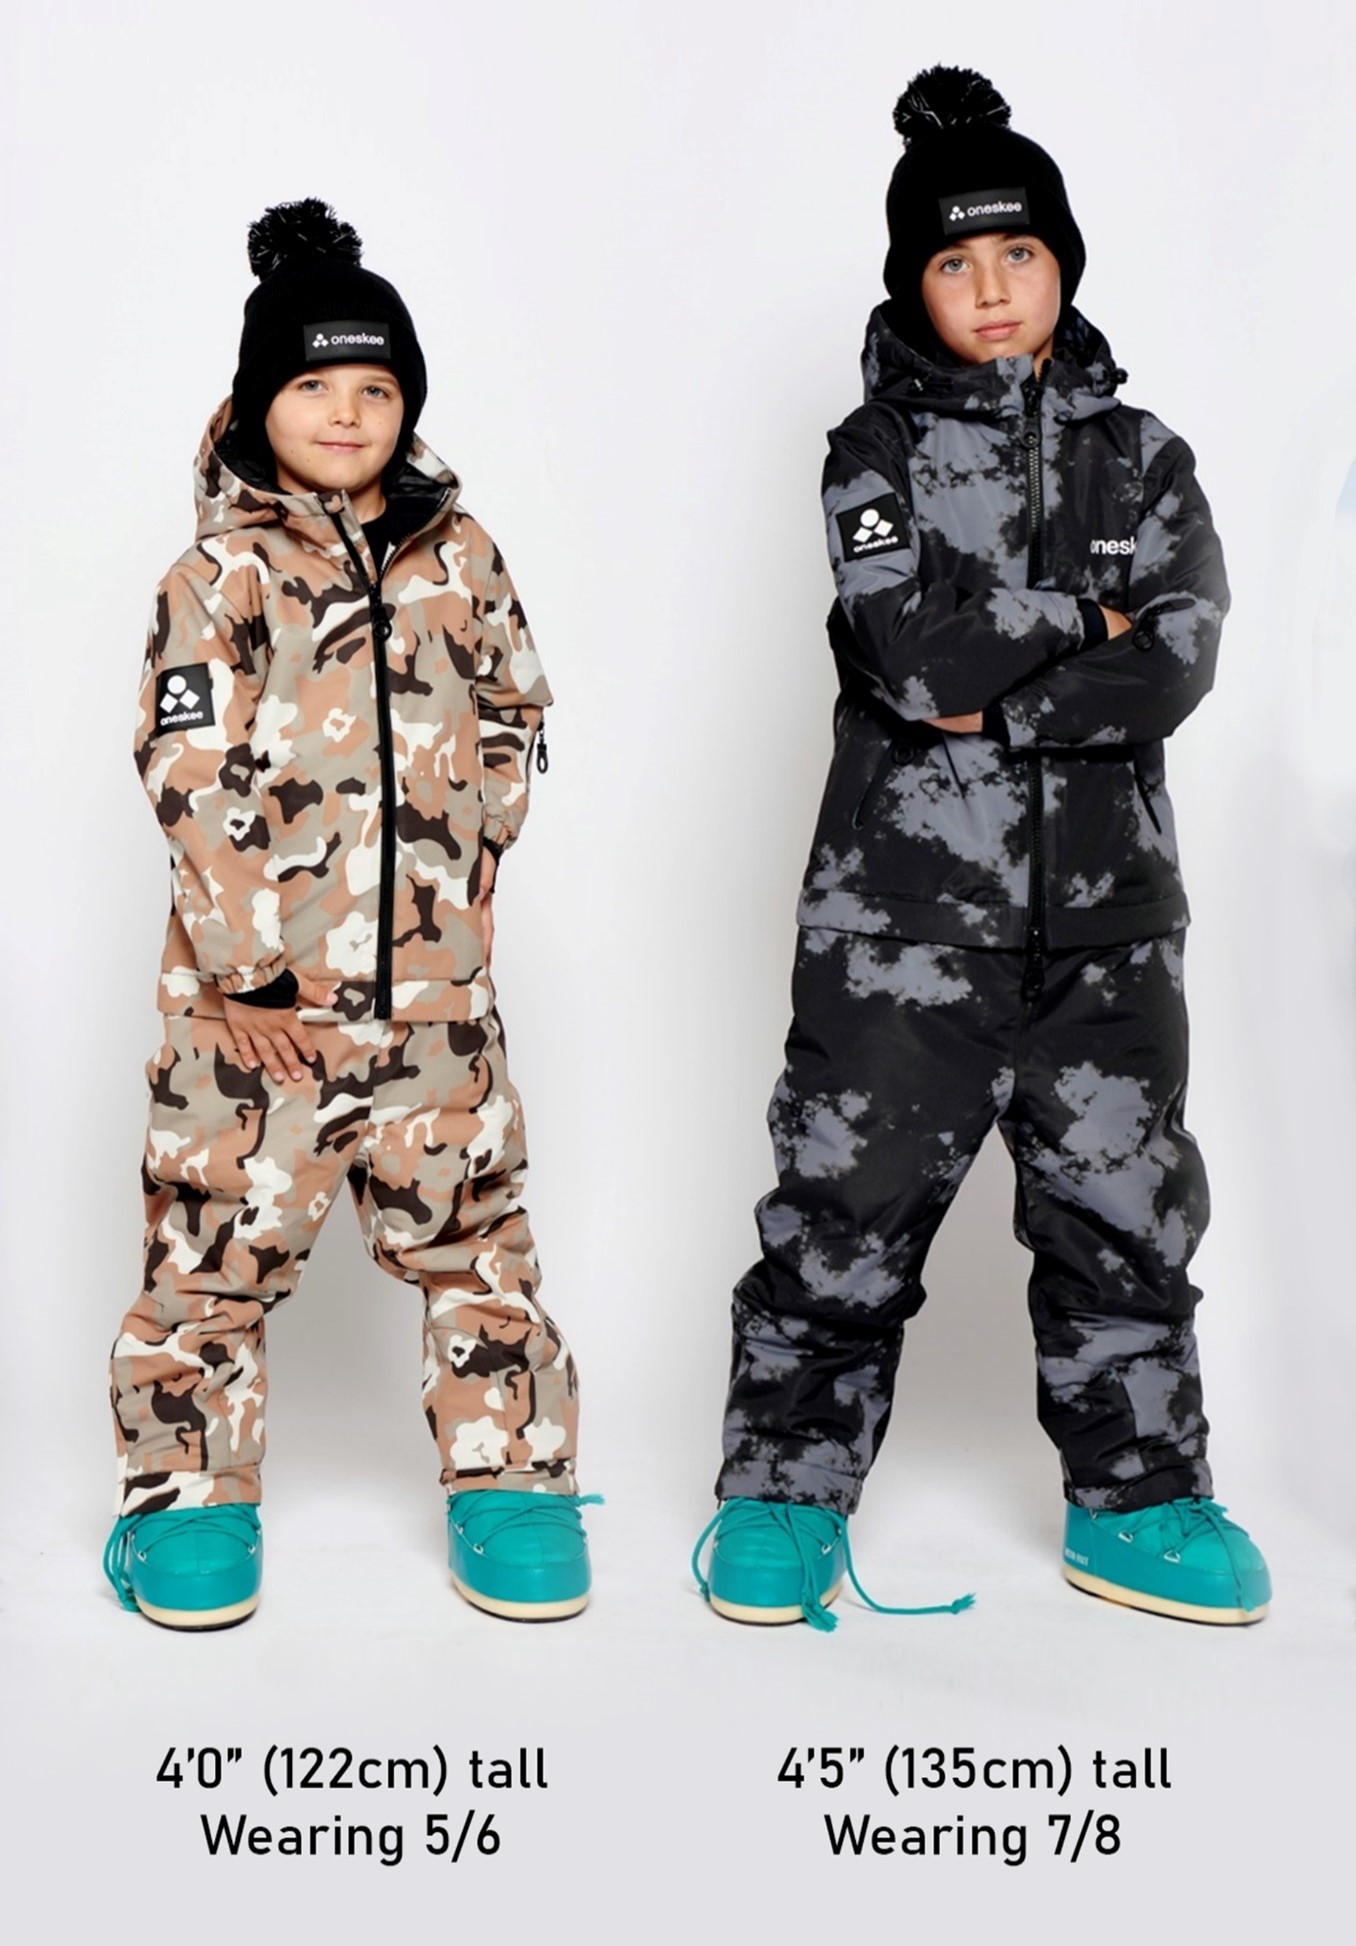 Two children modelling Ski Suits, the model on the left is 4'0" (122cm) tall Wearing. The model on the right is 5/6 4'5" (135cm) tall Wearing 7/8